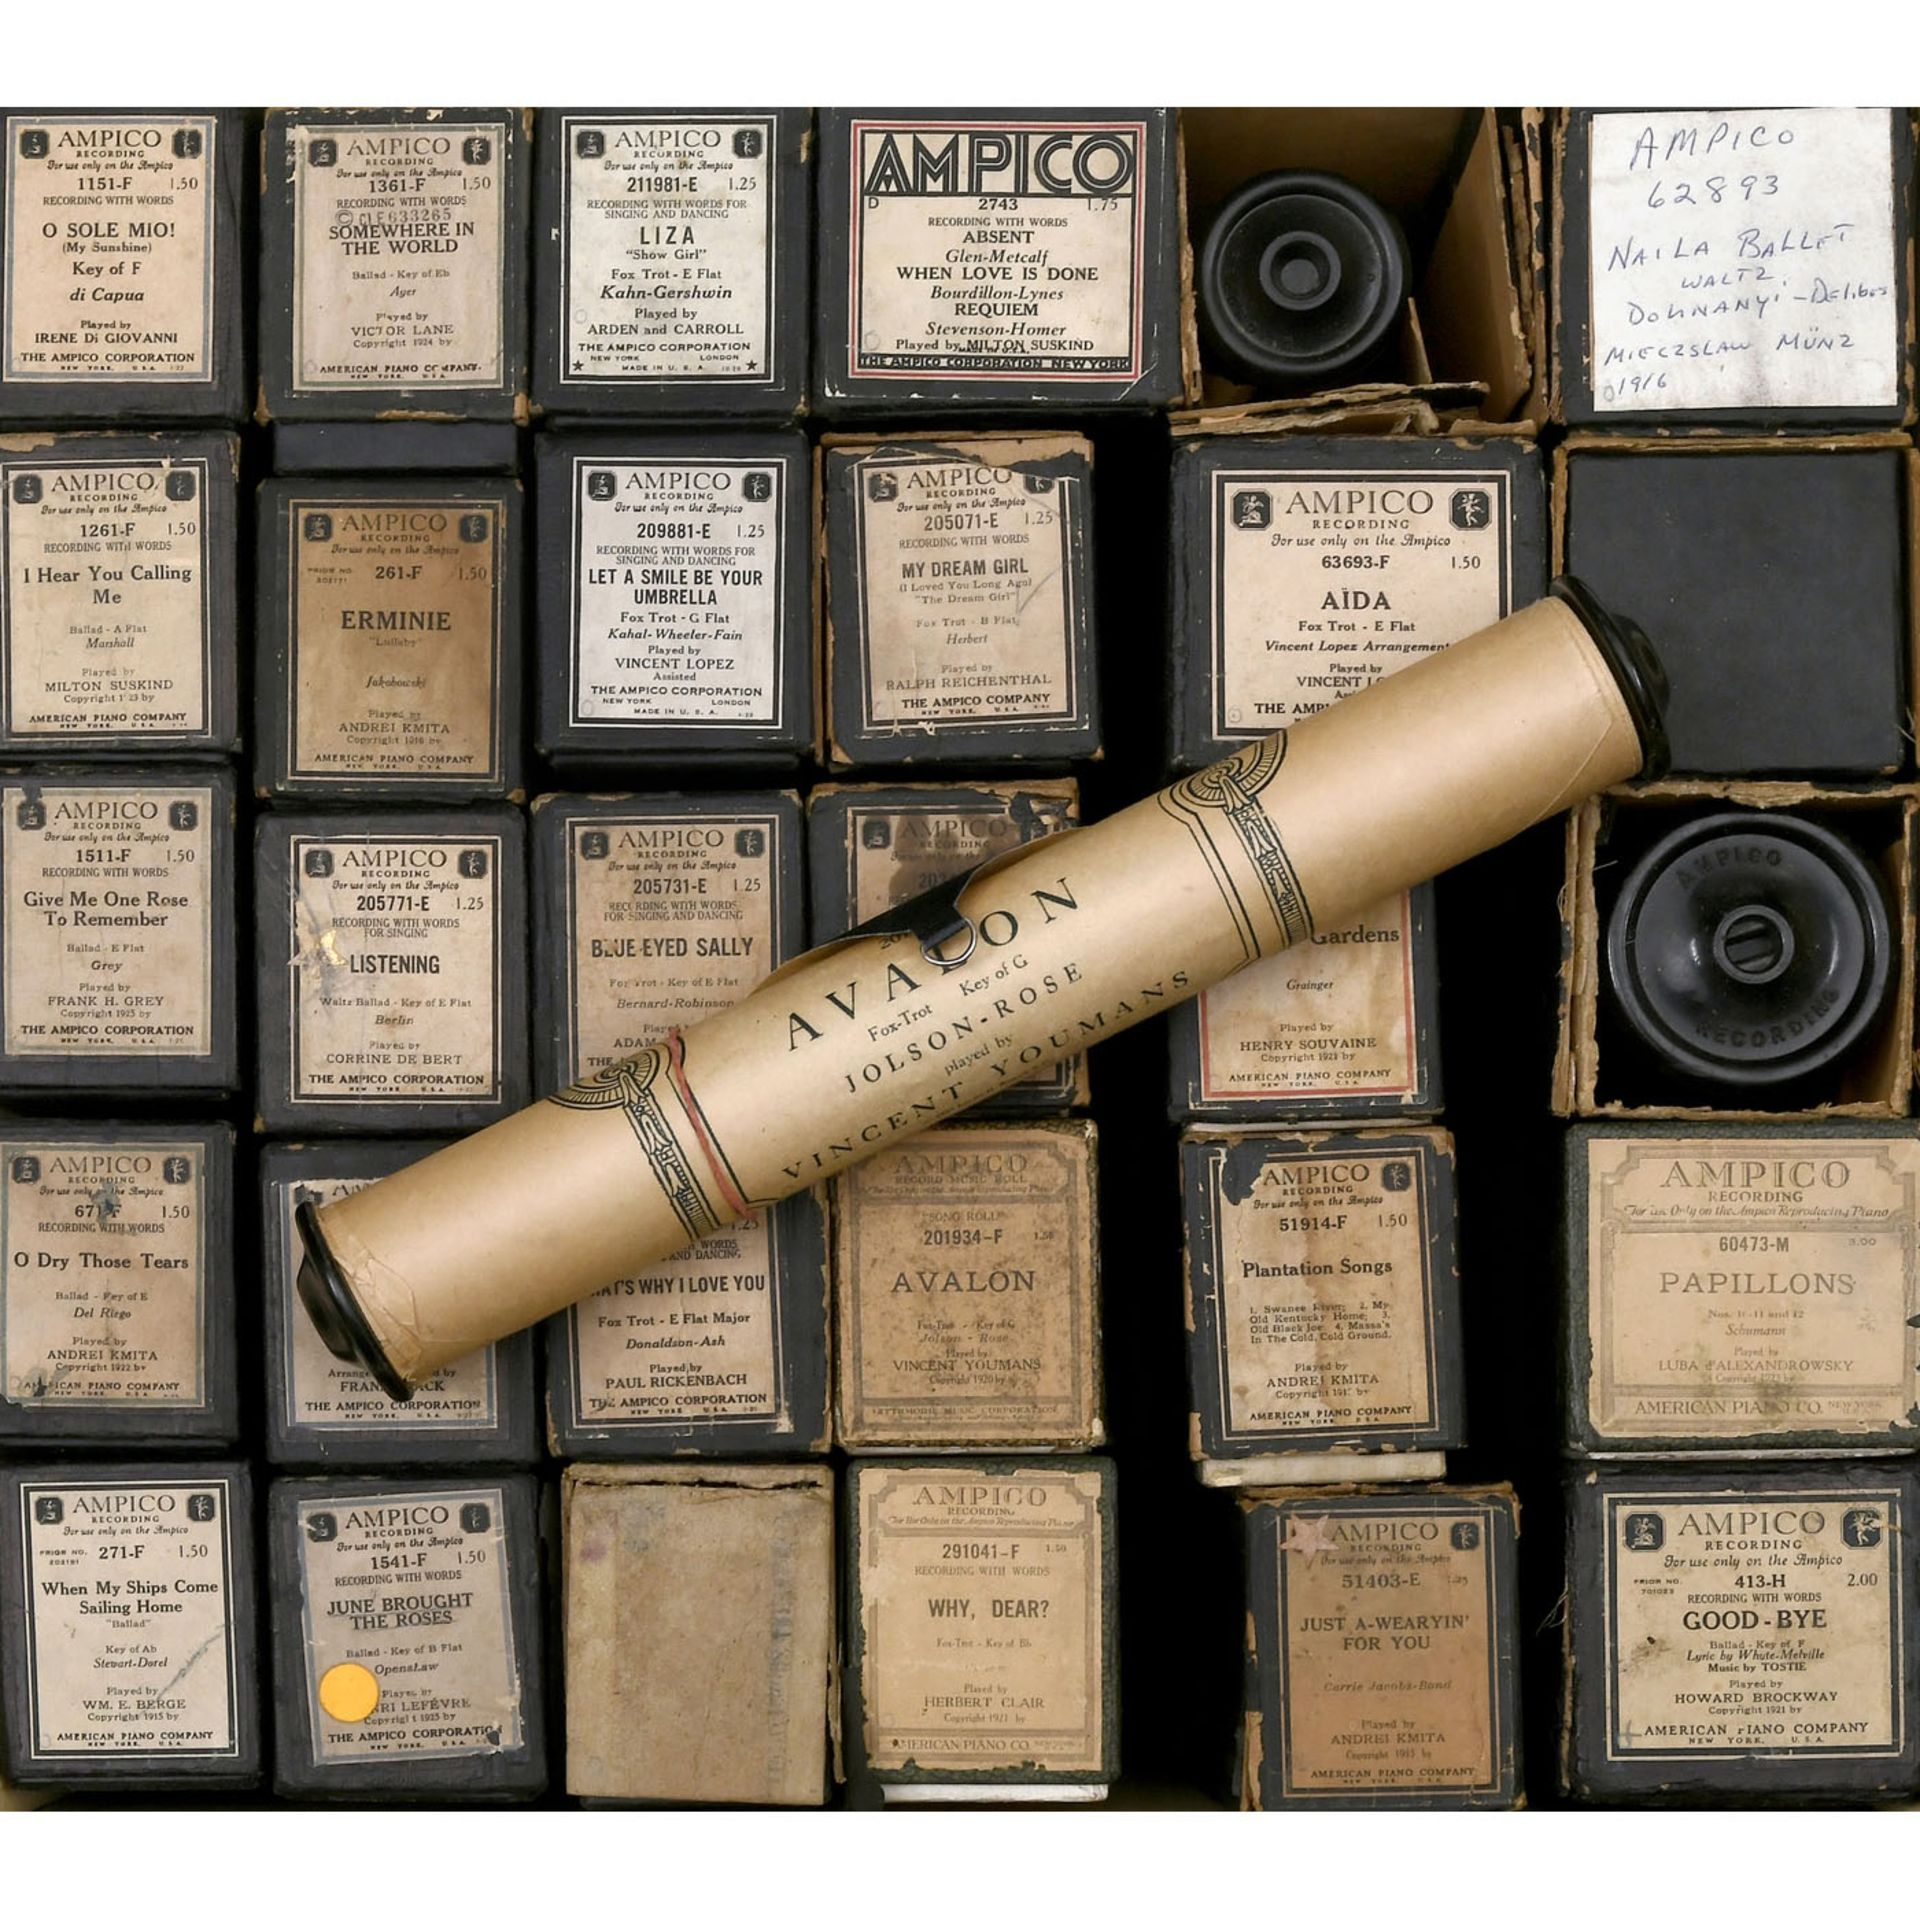 Lot of 233 Ampico Player Piano Rolls - Image 2 of 3